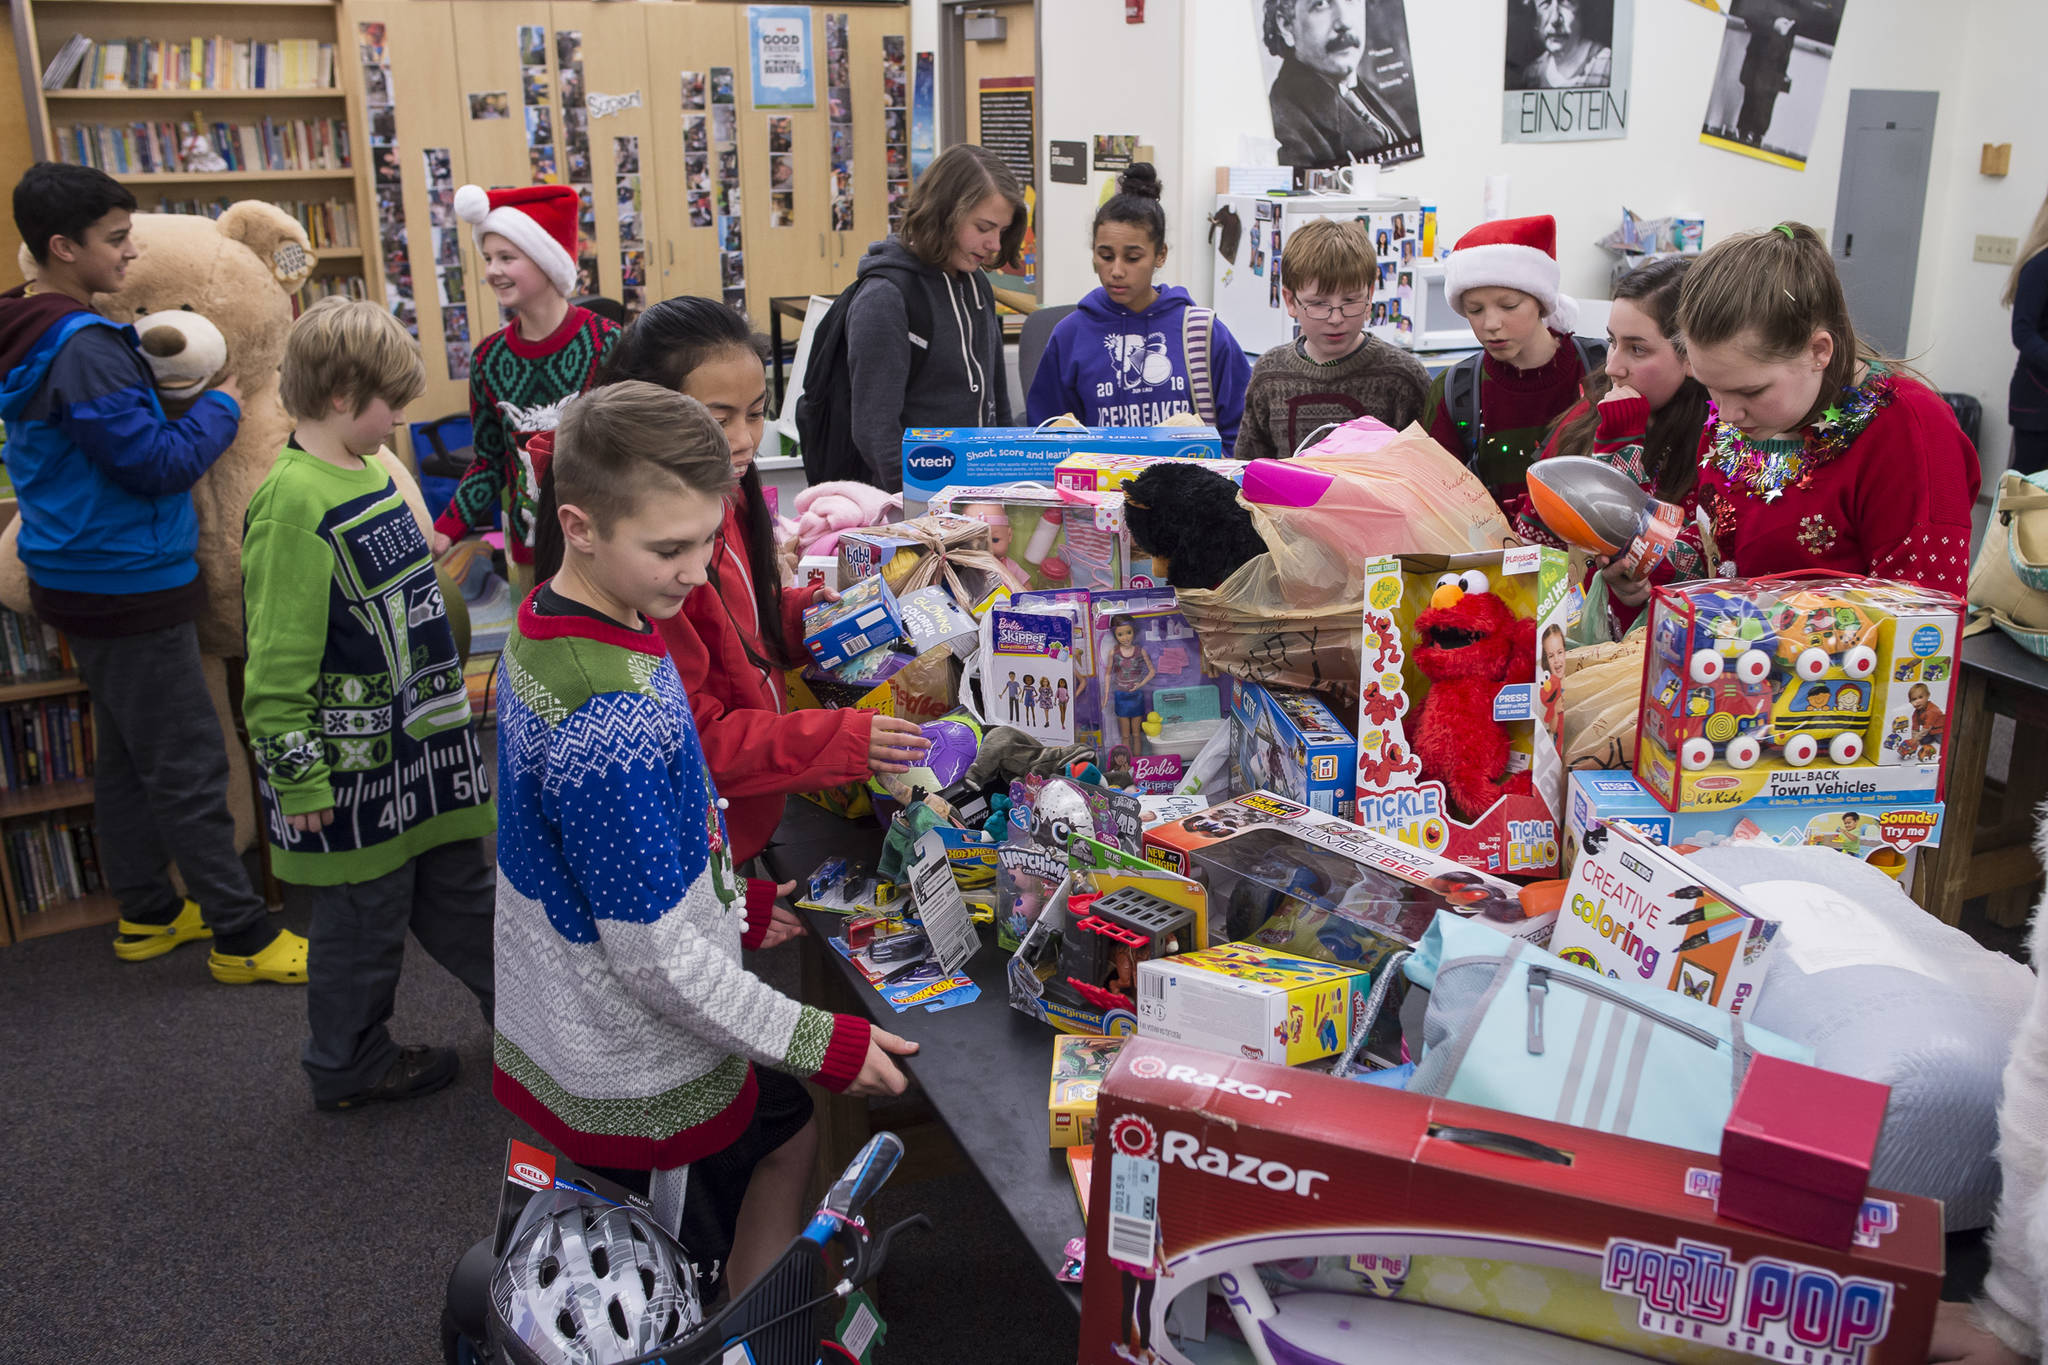 Floyd Dryden Middle School student council members gather around toys collected during a drive for Christmas presents to children in need at FDMS on Monday, Dec. 17, 2018. The toys and gift cards were handed over to the Alaska Department of Health and Social Services’ Office of Children Services for distribution. (Michael Penn | Juneau Empire)